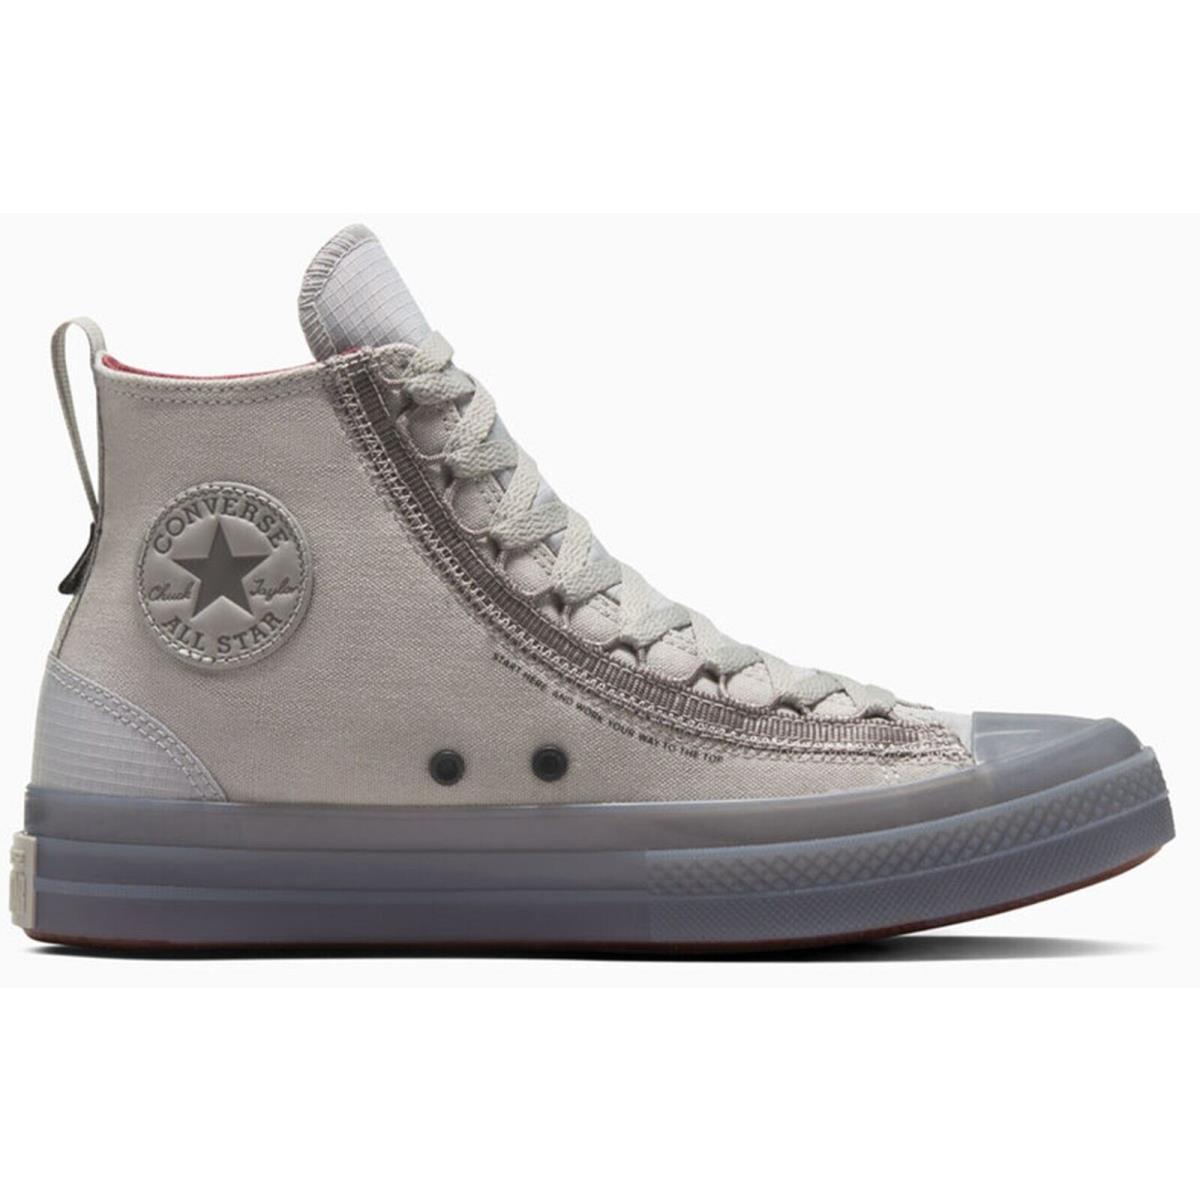 Converse Chuck Taylor All Star CX EXP2 High Top Shoes Limited Edition Gray